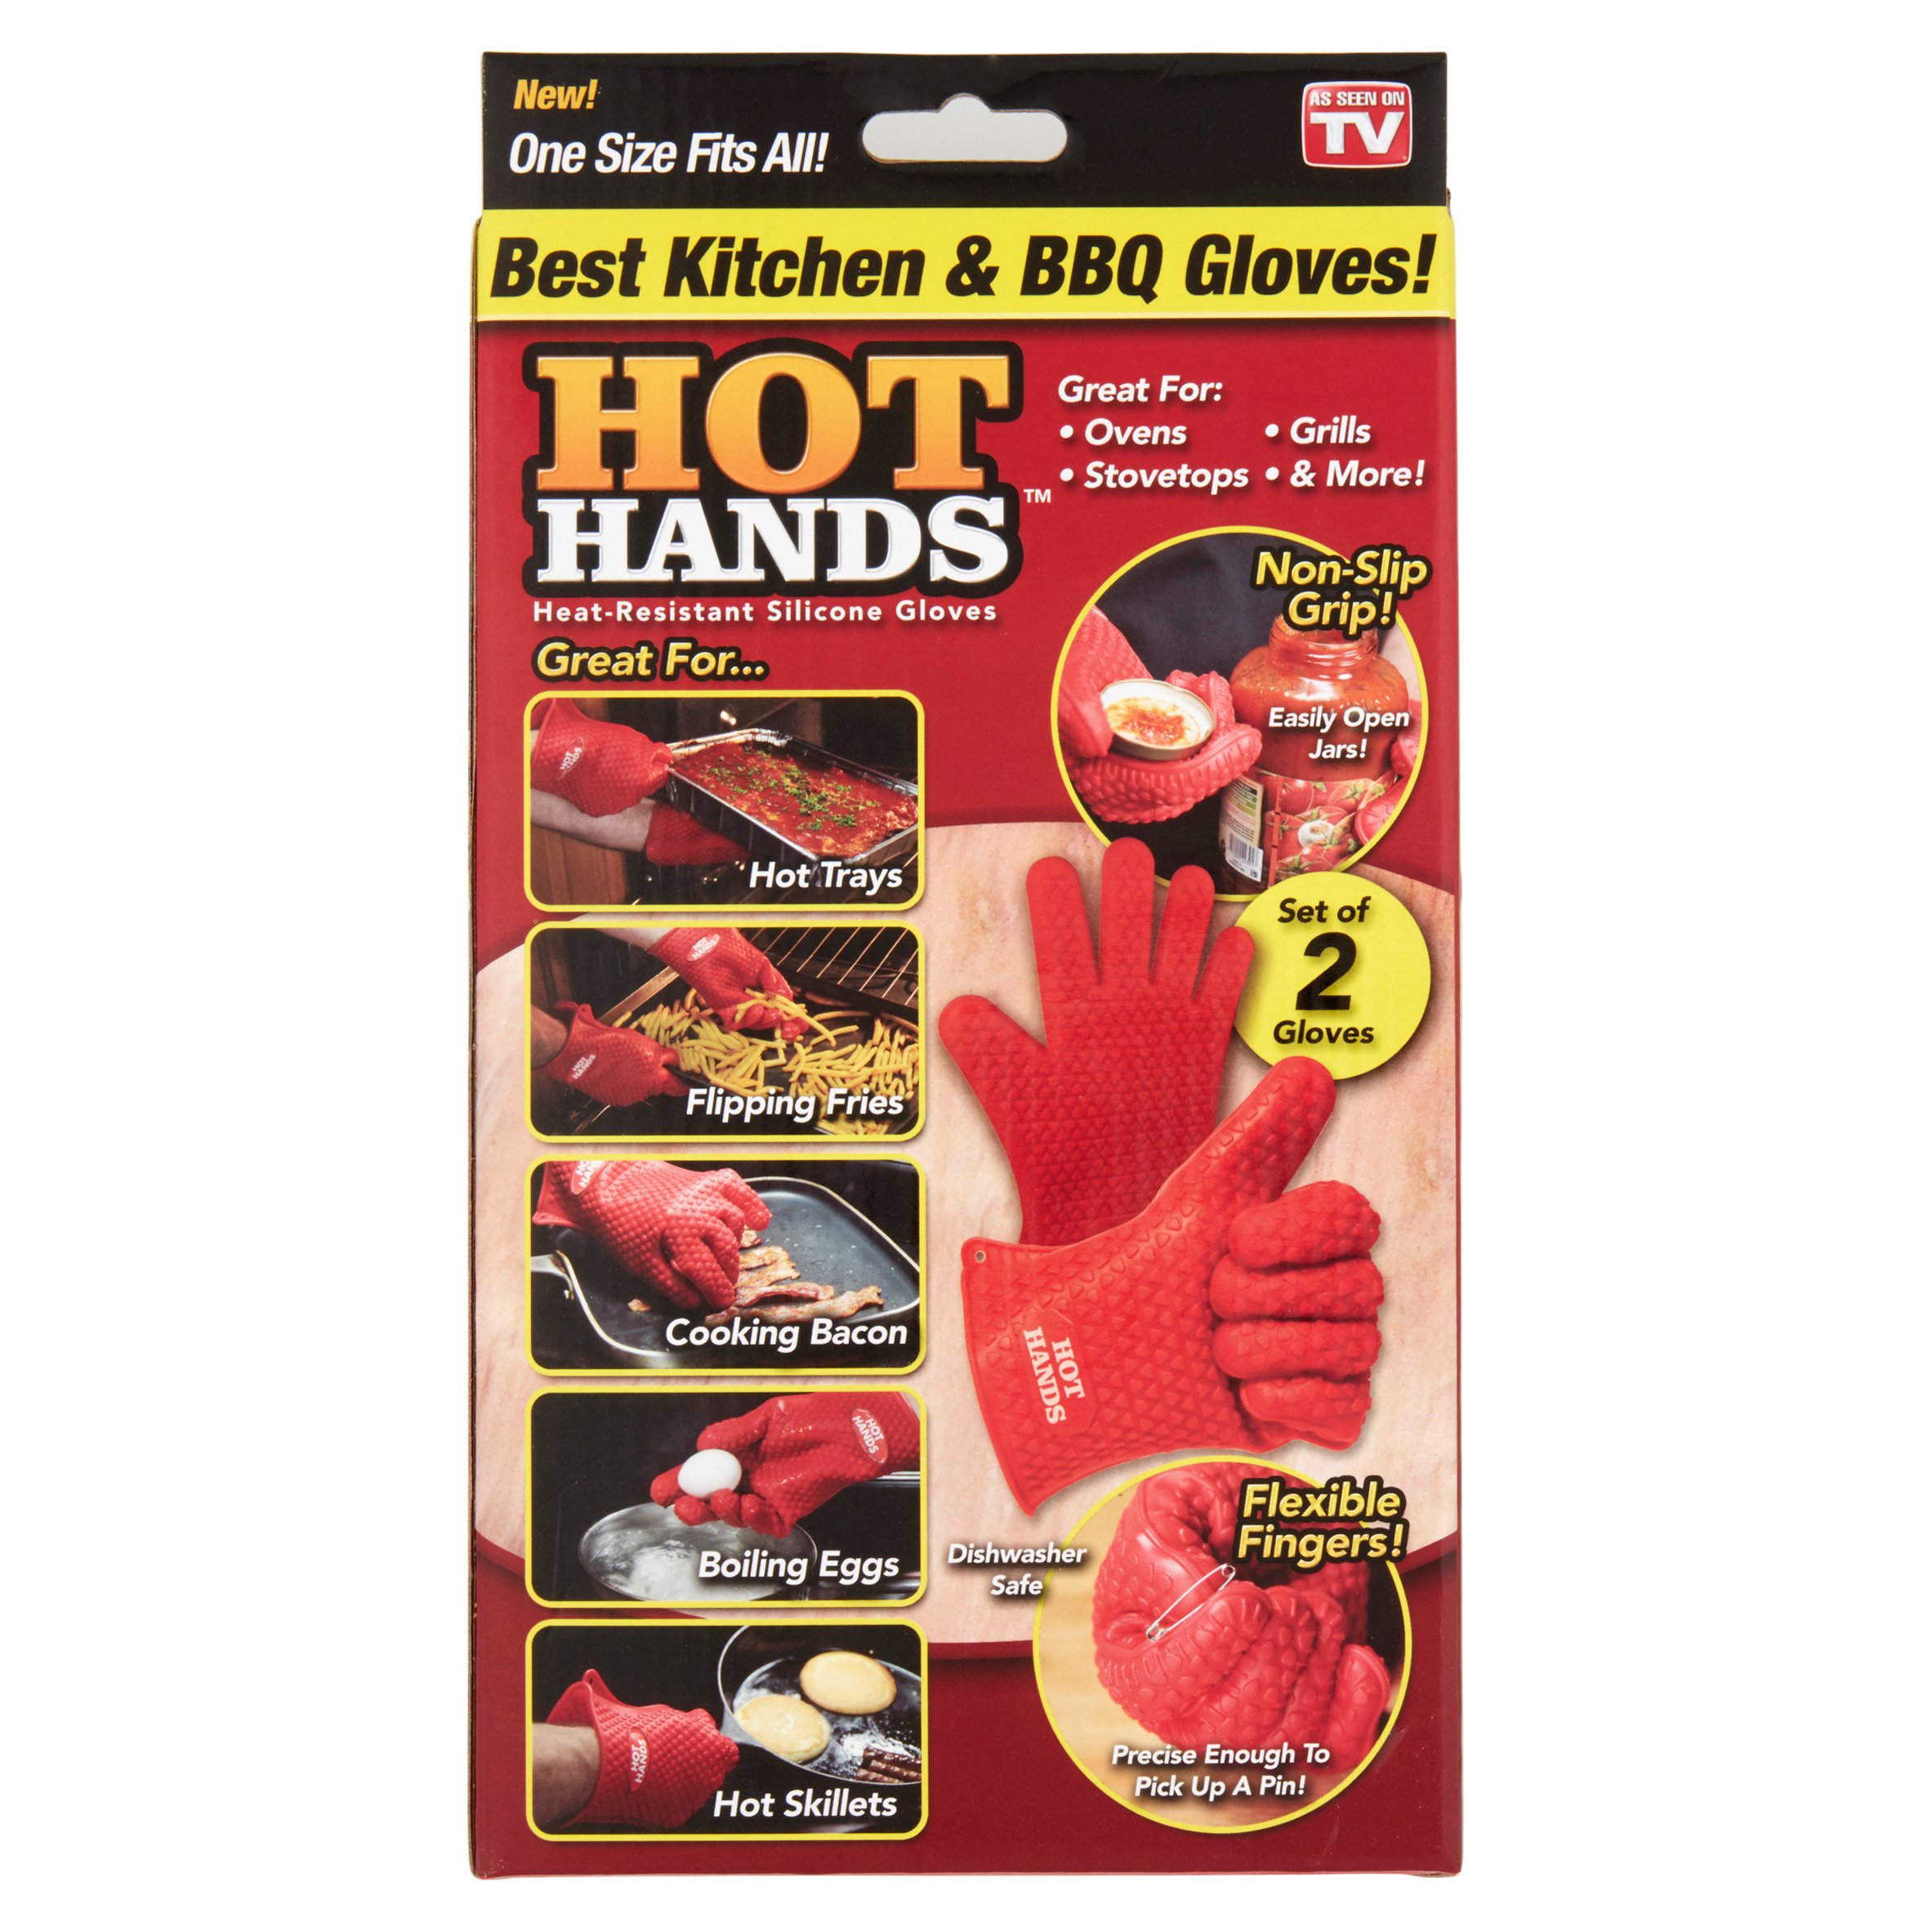 Hot Hands Heat-Resistant Silicone Gloves - image 4 of 5